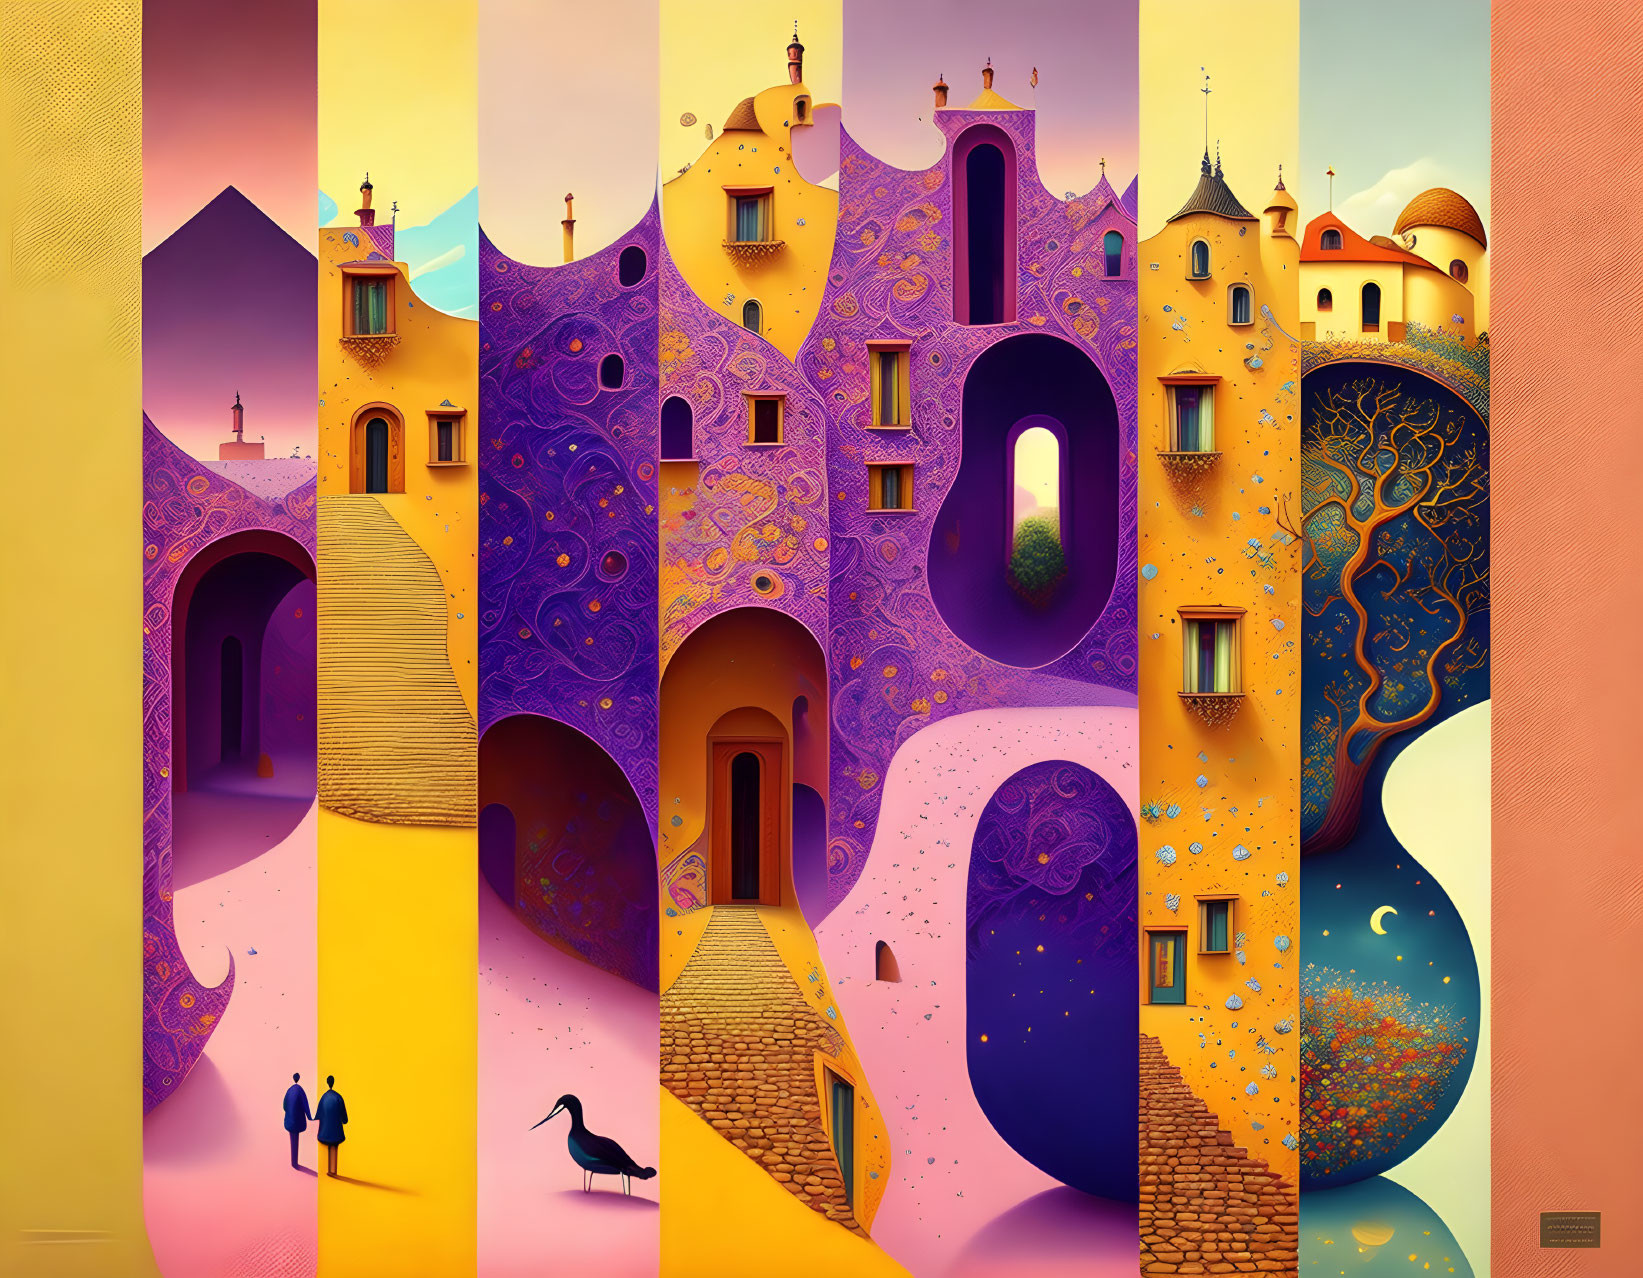 Colorful surreal illustration of whimsical buildings and silhouetted figures